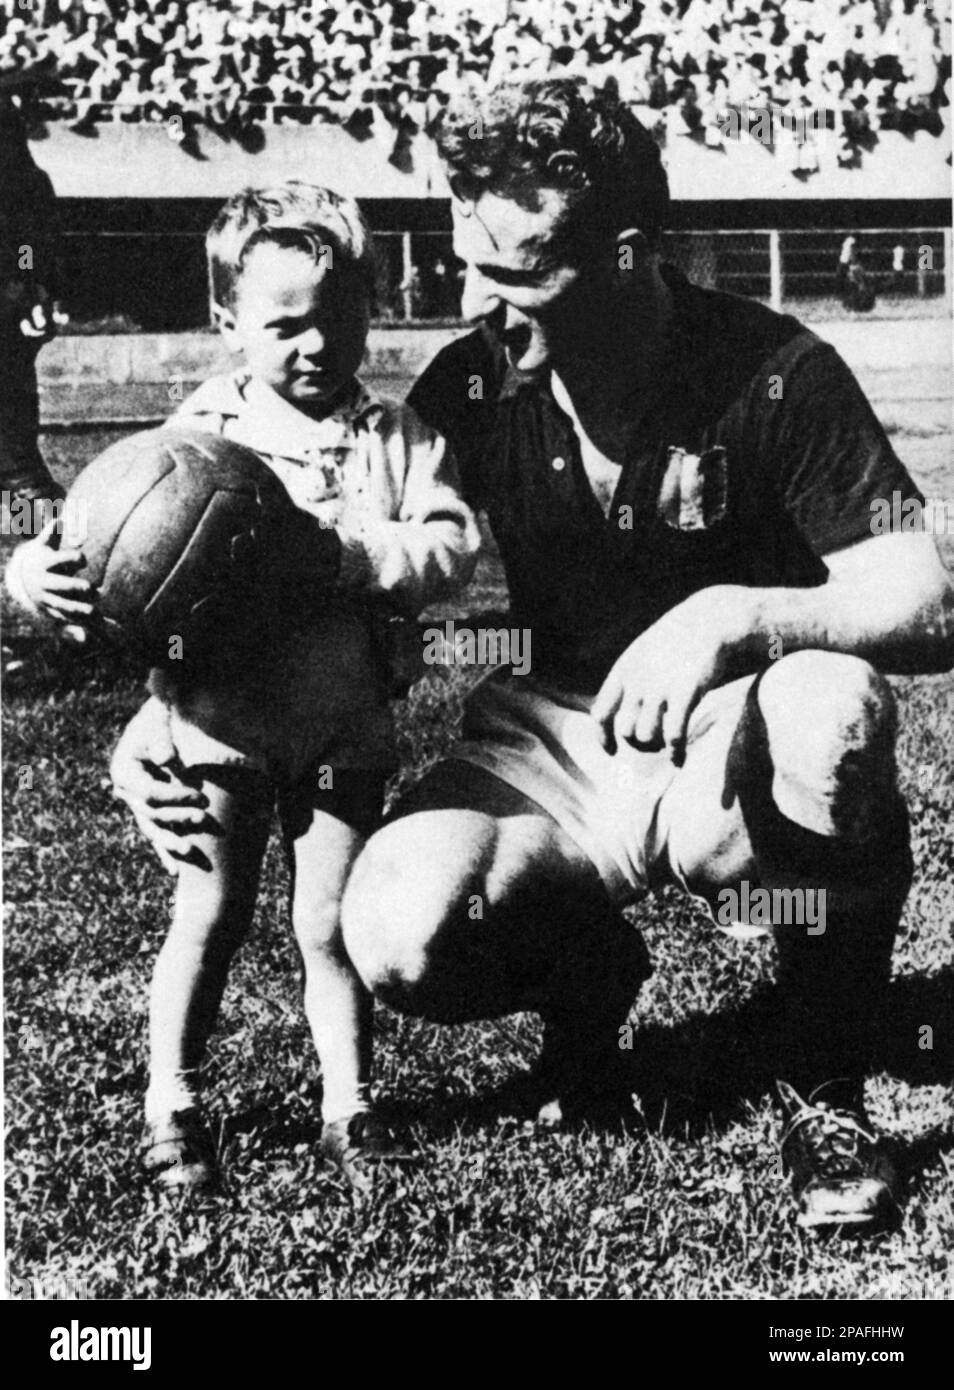 1945 ca : SANDRO ( Alessandro ) MAZZOLA  ( born November 8, 1942 ) is an Italian former football player . In this photo with father VALENTINO MAZZOLA ( 1919 - 1949 ), who was killed in the Superga air disaster in 1949. sandro was one of the most renowned Italian football players of 1960s . He played for the Inter Milan team known as La Grande INTER . He was an inside right with top goalscoring instincts. He was also blessed with superb creativity helped by his pin point passing, dribbling and ball control. He also often played as a creative attacking midfielder. - SOCCER PLAYER - personalita' Stock Photo